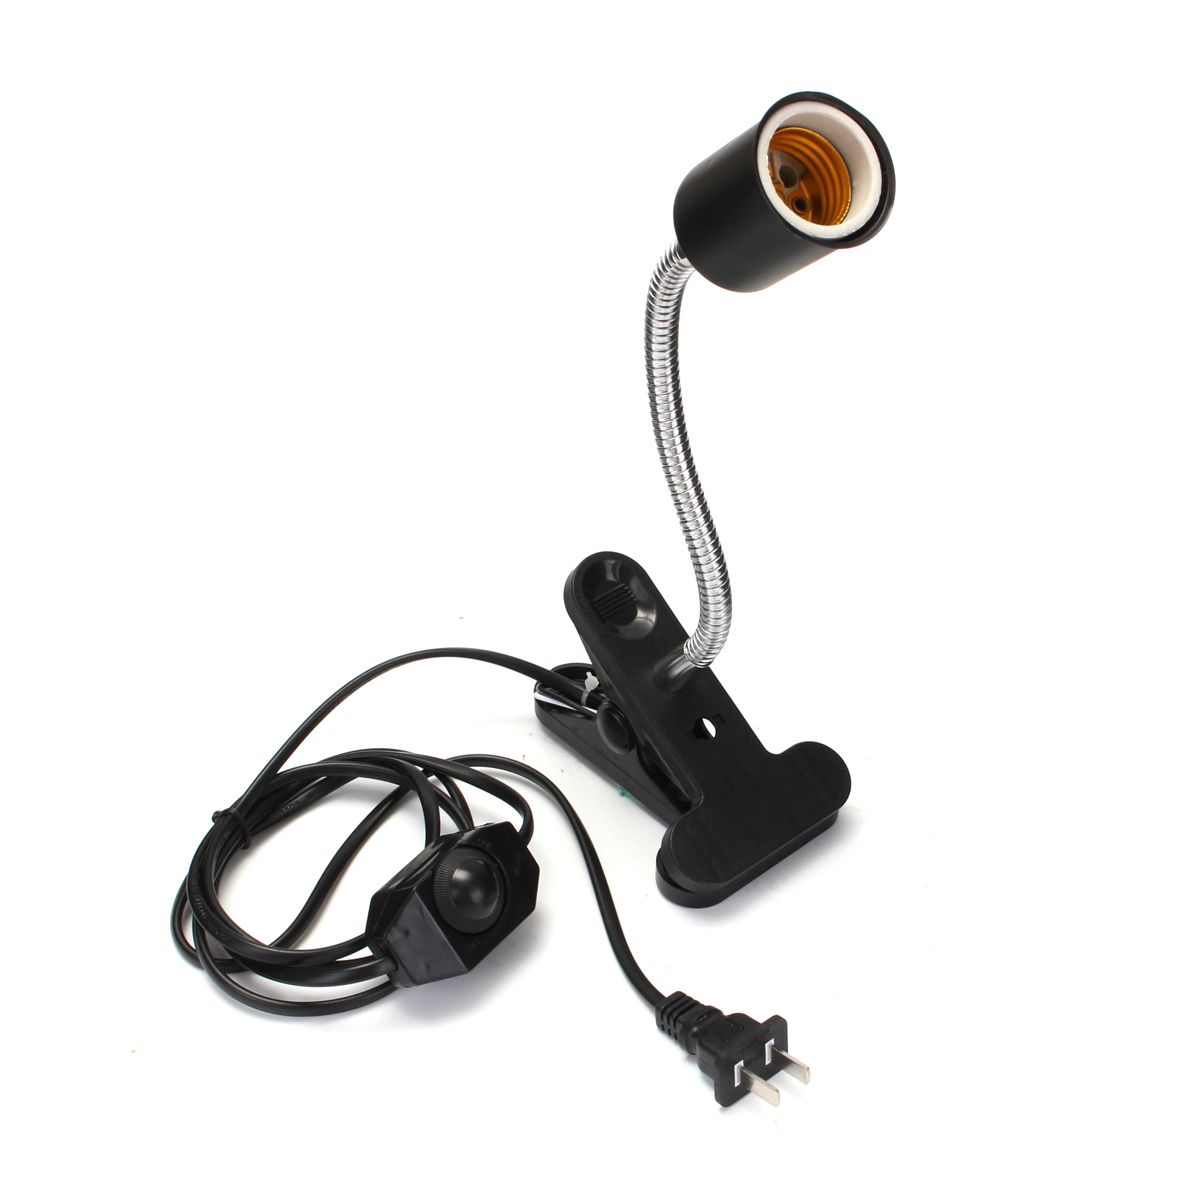 30CM-E27-Flexible-Pet-Heat-Light-Bulb-Adapter-Lamp-Holder-Socket-with-Clip-Dimming-Switch-1309671